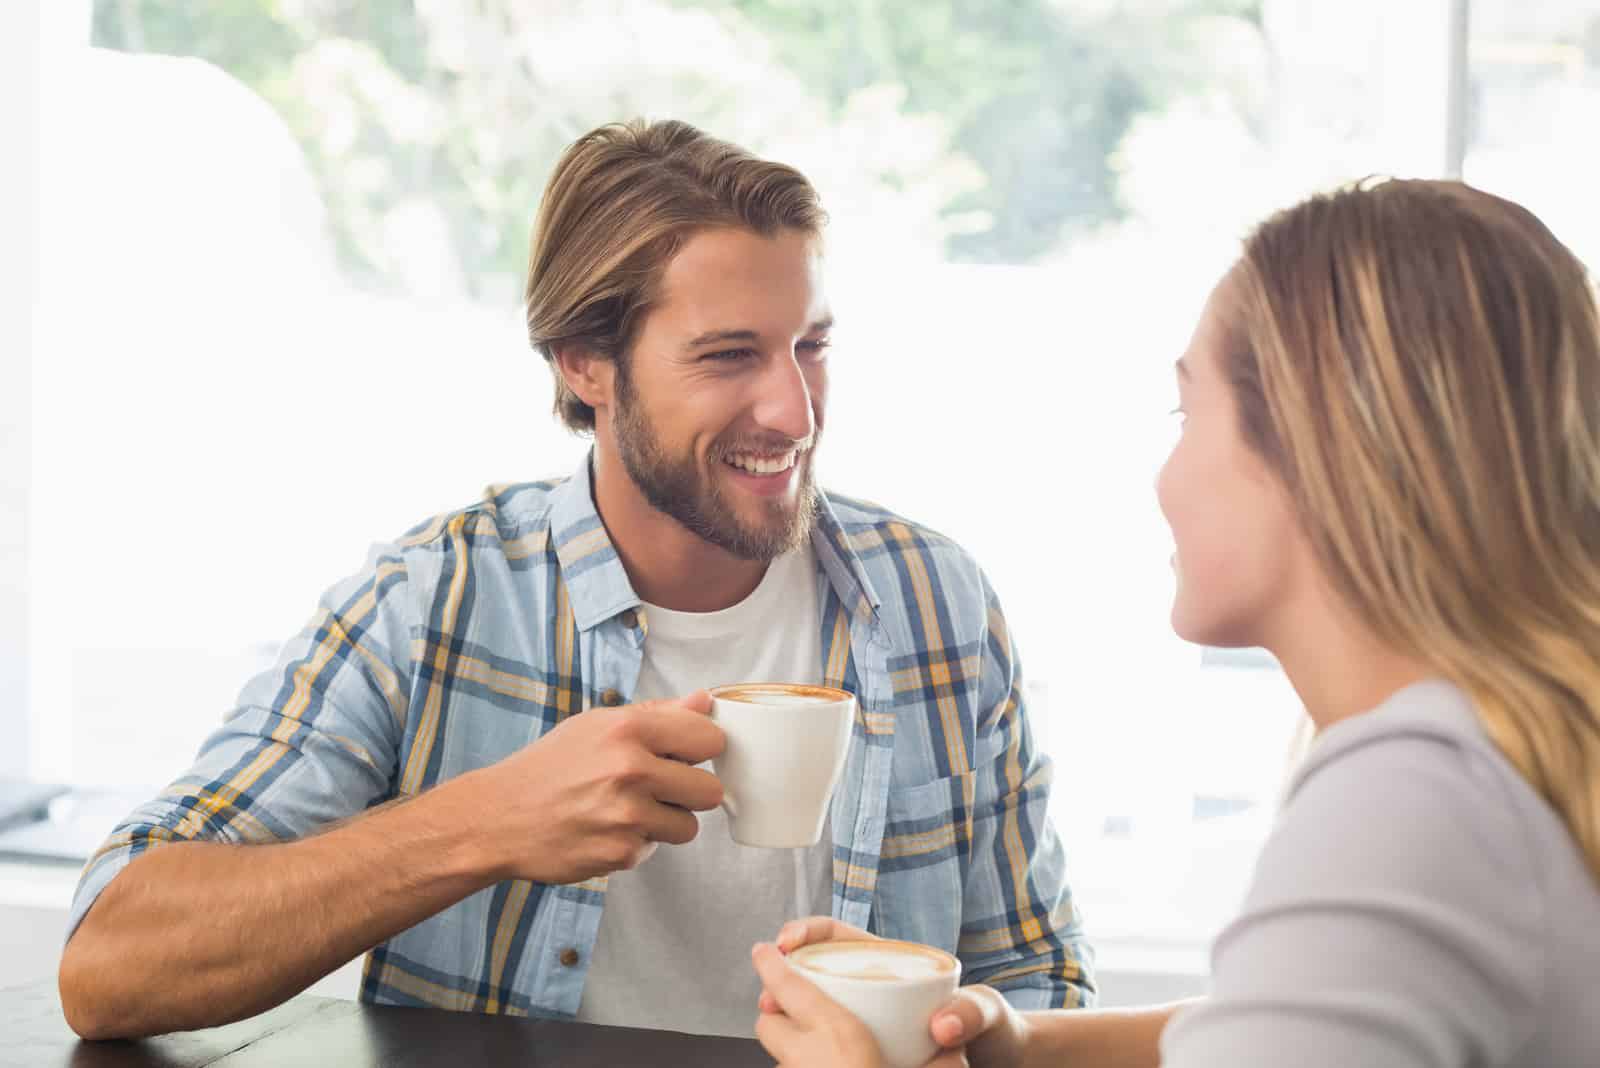 a smiling man sitting at a table with a woman drinking coffee